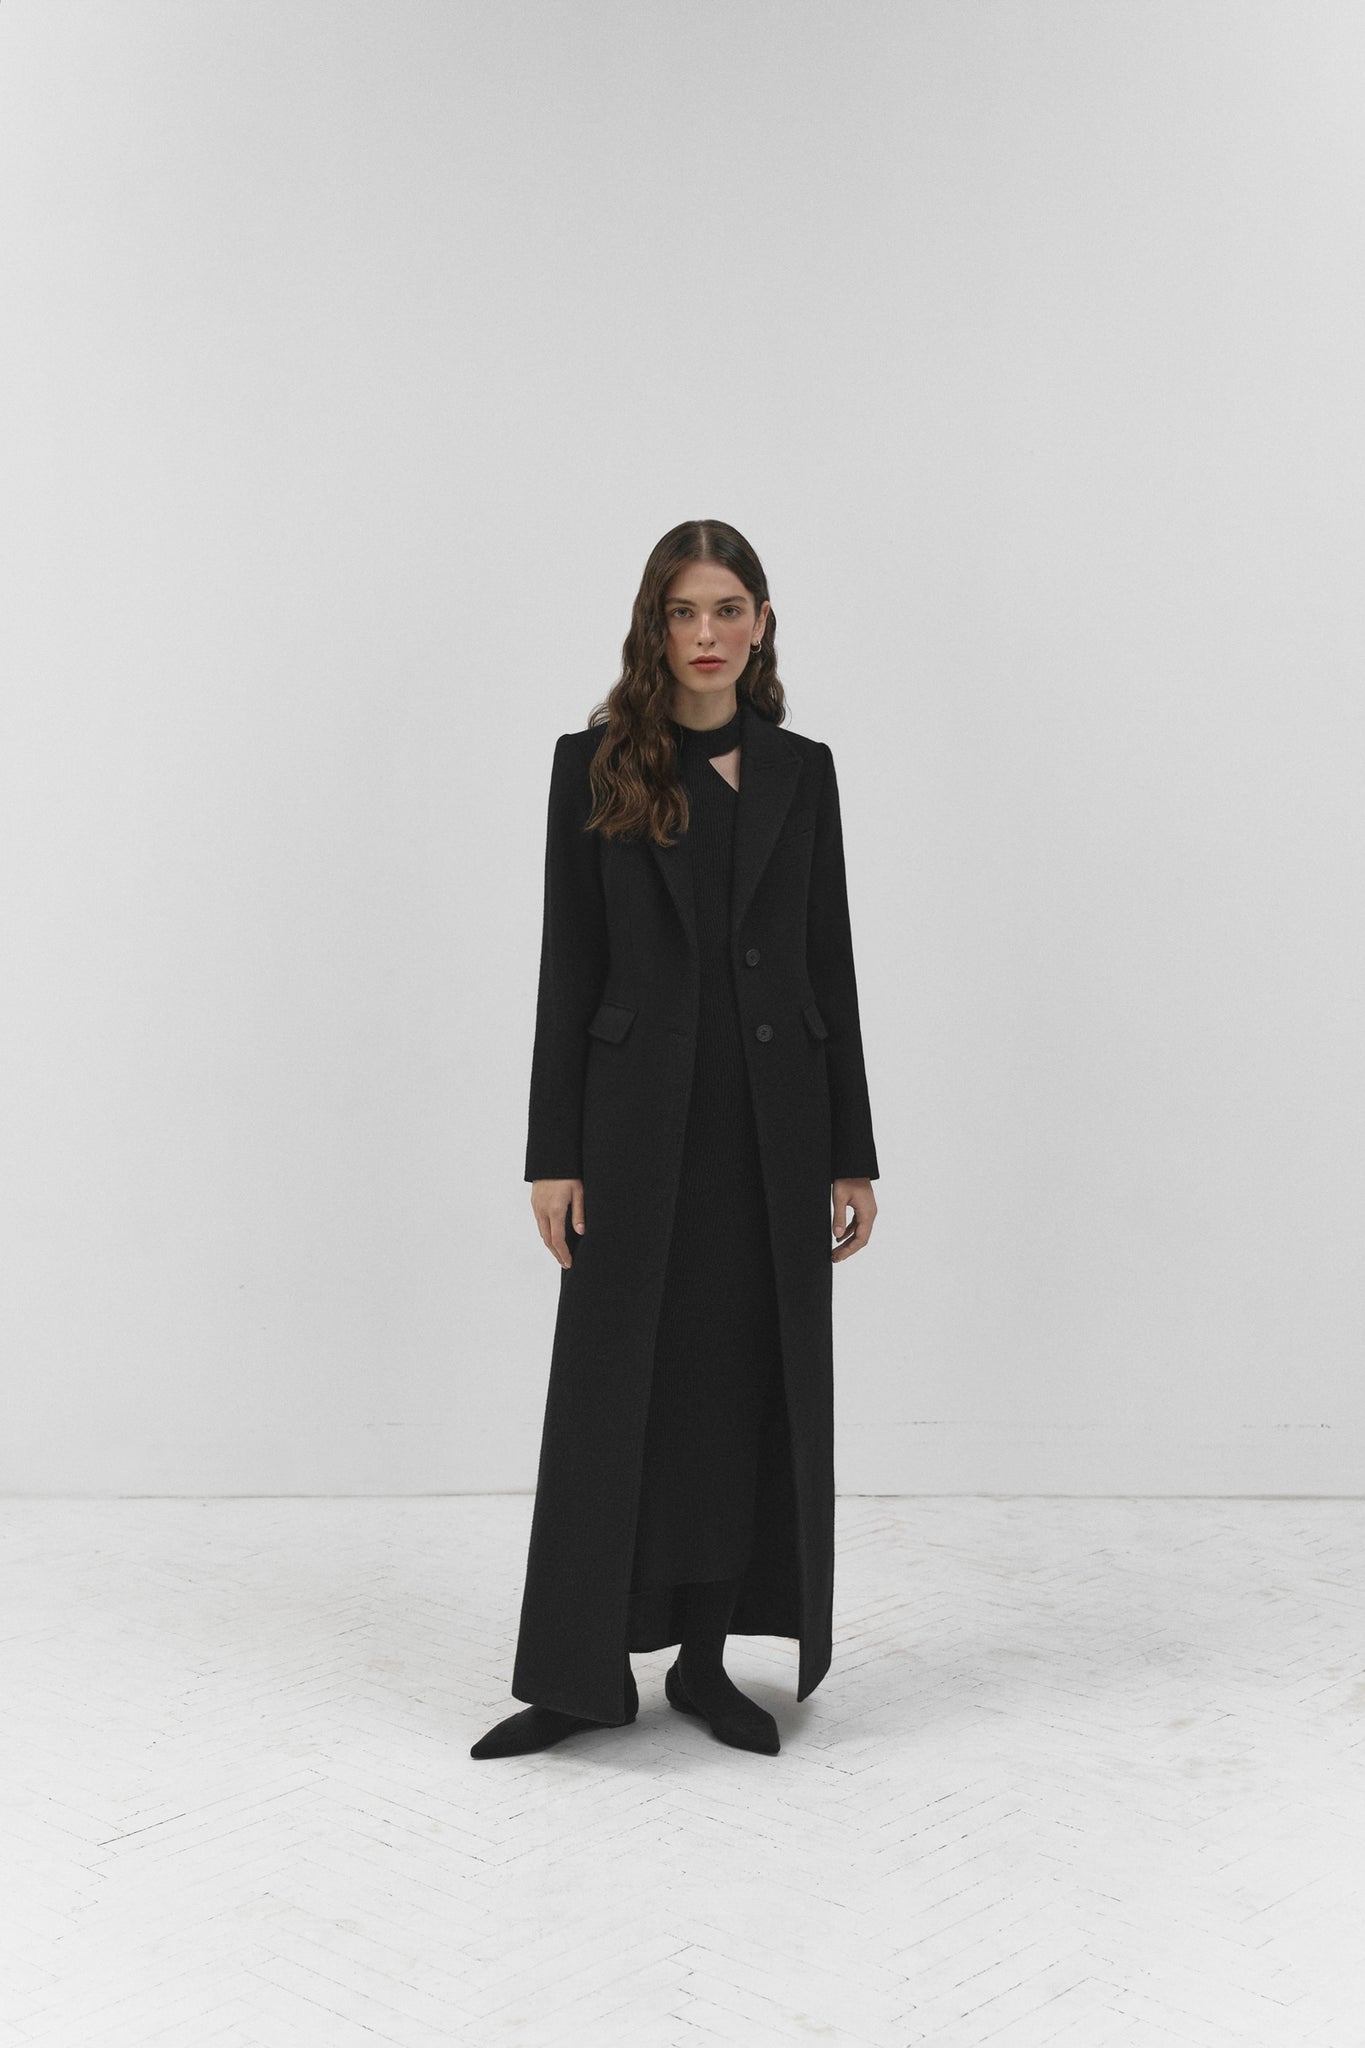 Tapered Black Wool Coat in Maxi Length with Waist-Fitted Silhouette photo 1